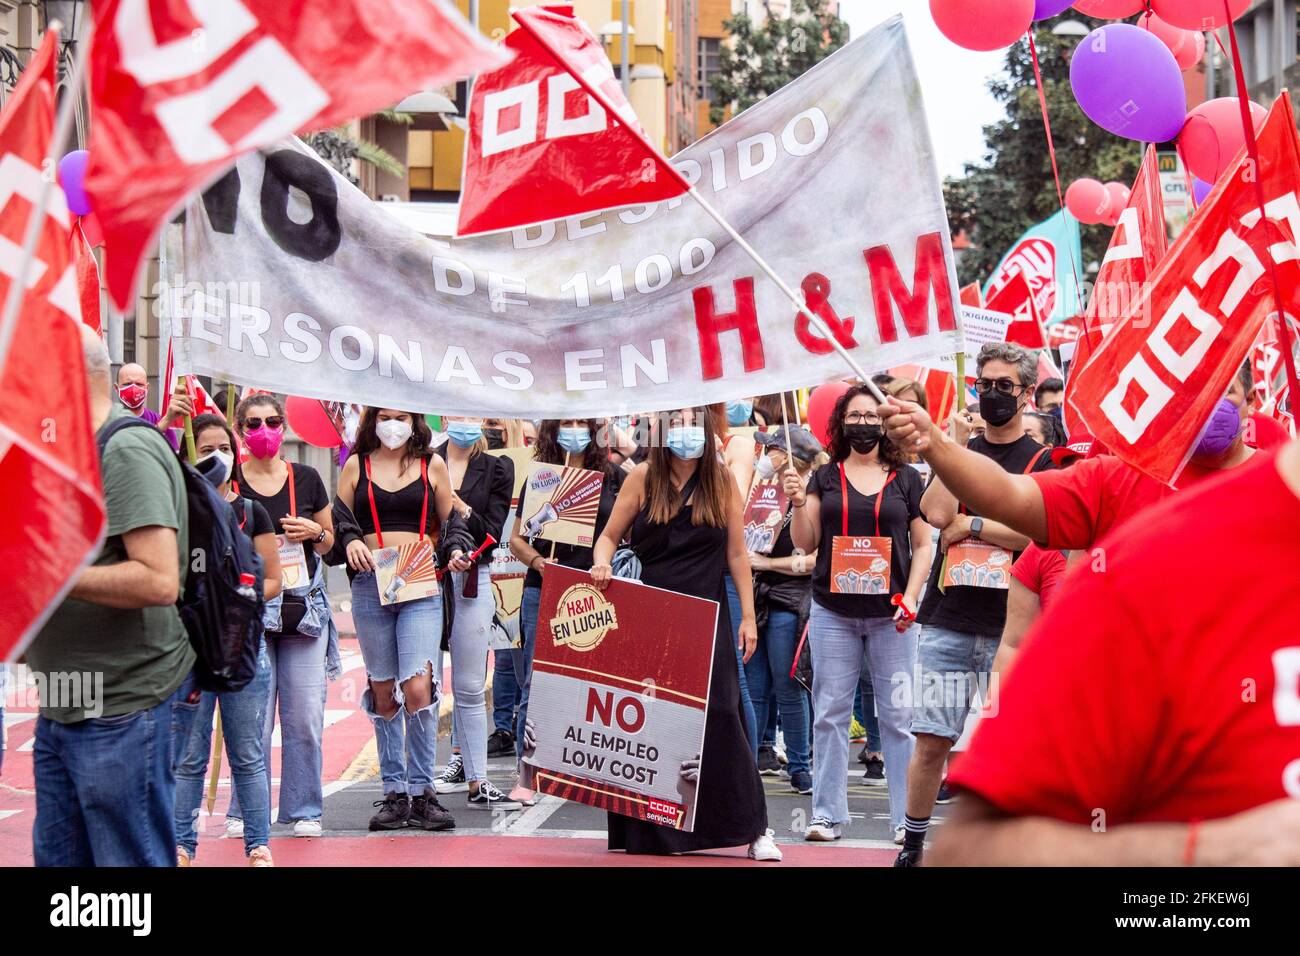 Las Palmas, Gran Canaria, Canary Islands, Spain. 1st May, 2021. Labour  day/International workers' day demonstration in Las Palmas the capital of Gran  Canaria. PICTURED: H&M store employees protest against the proposed closure